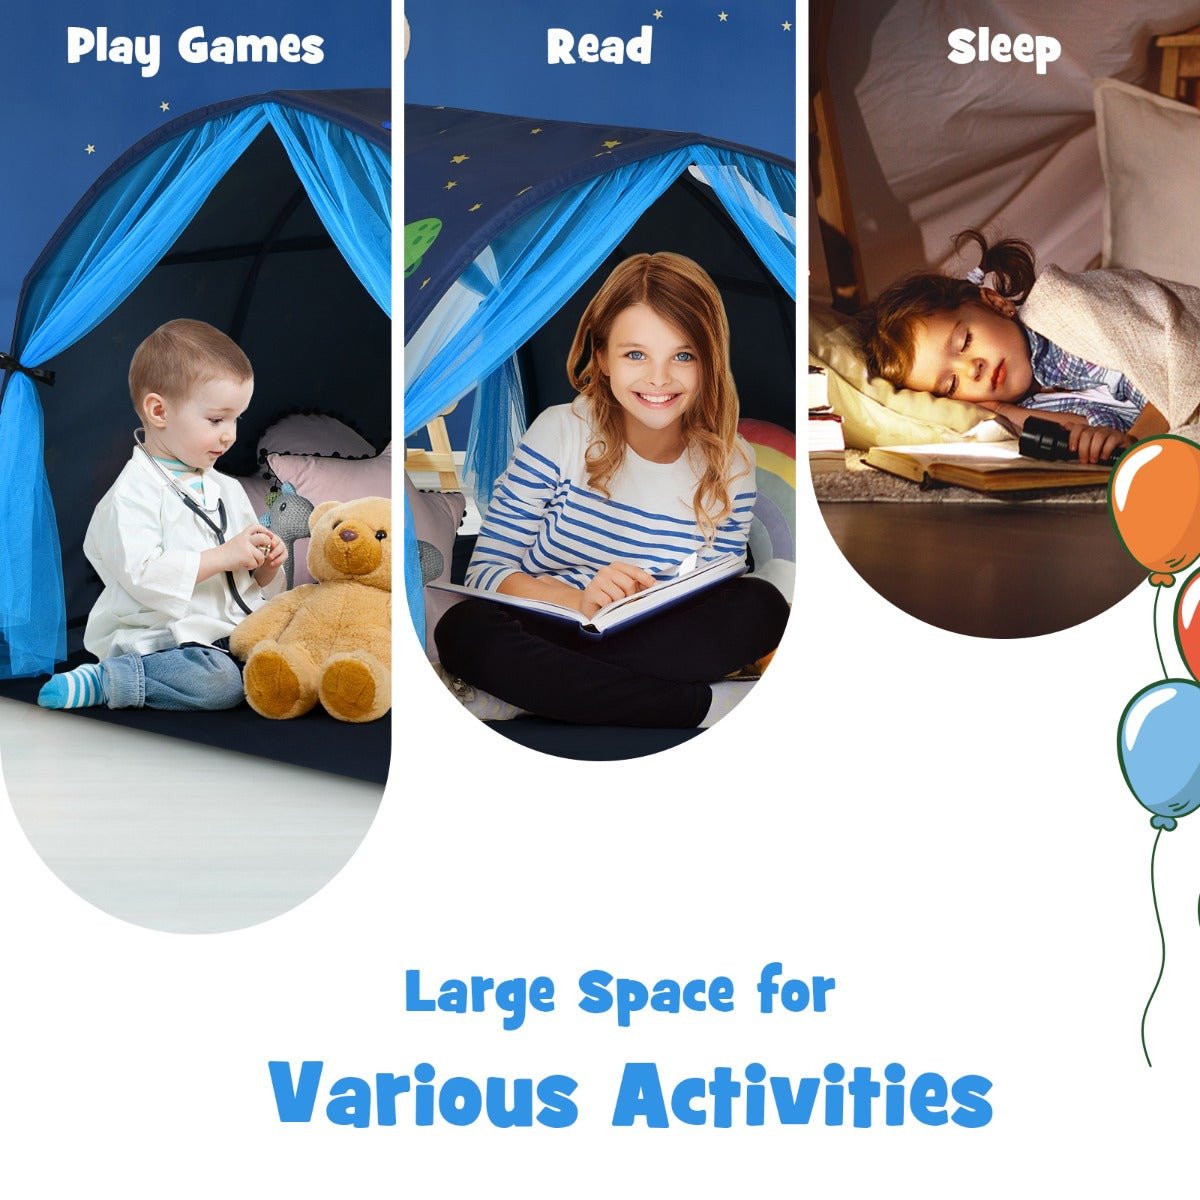 Create Memories: Twin Sleeping Tent Playhouse with Carry Bag